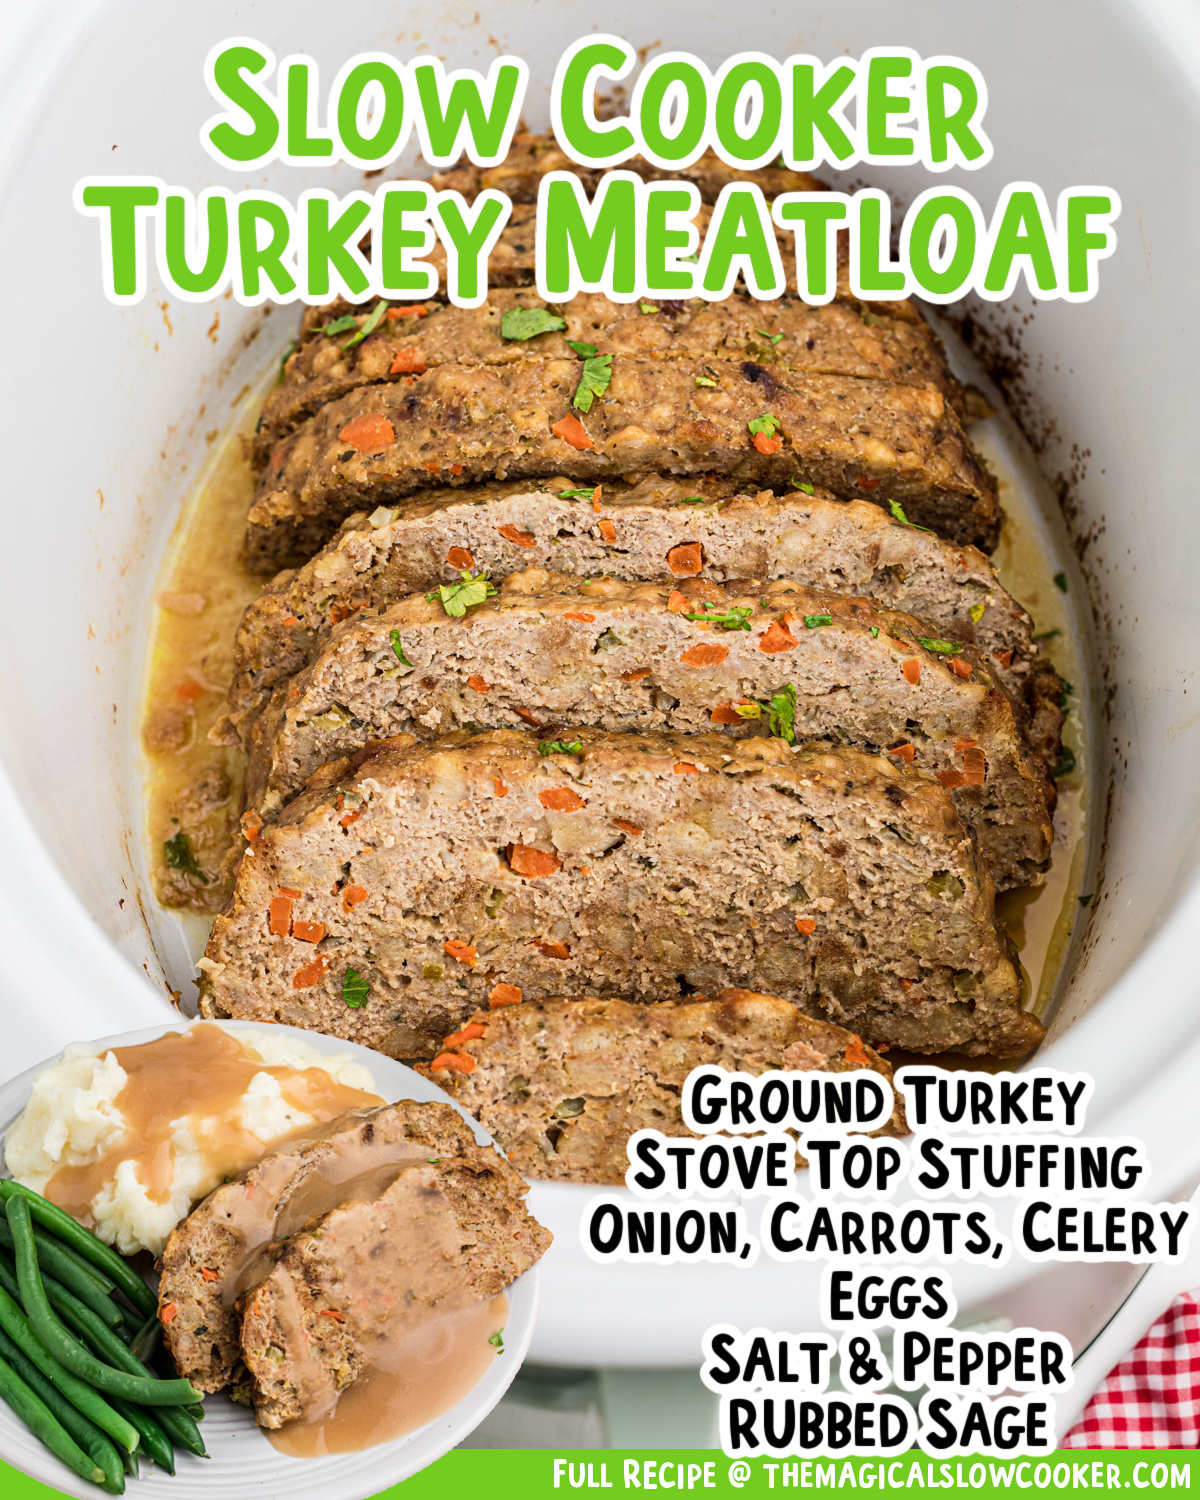 images of turkey meatloaf with text overlay.